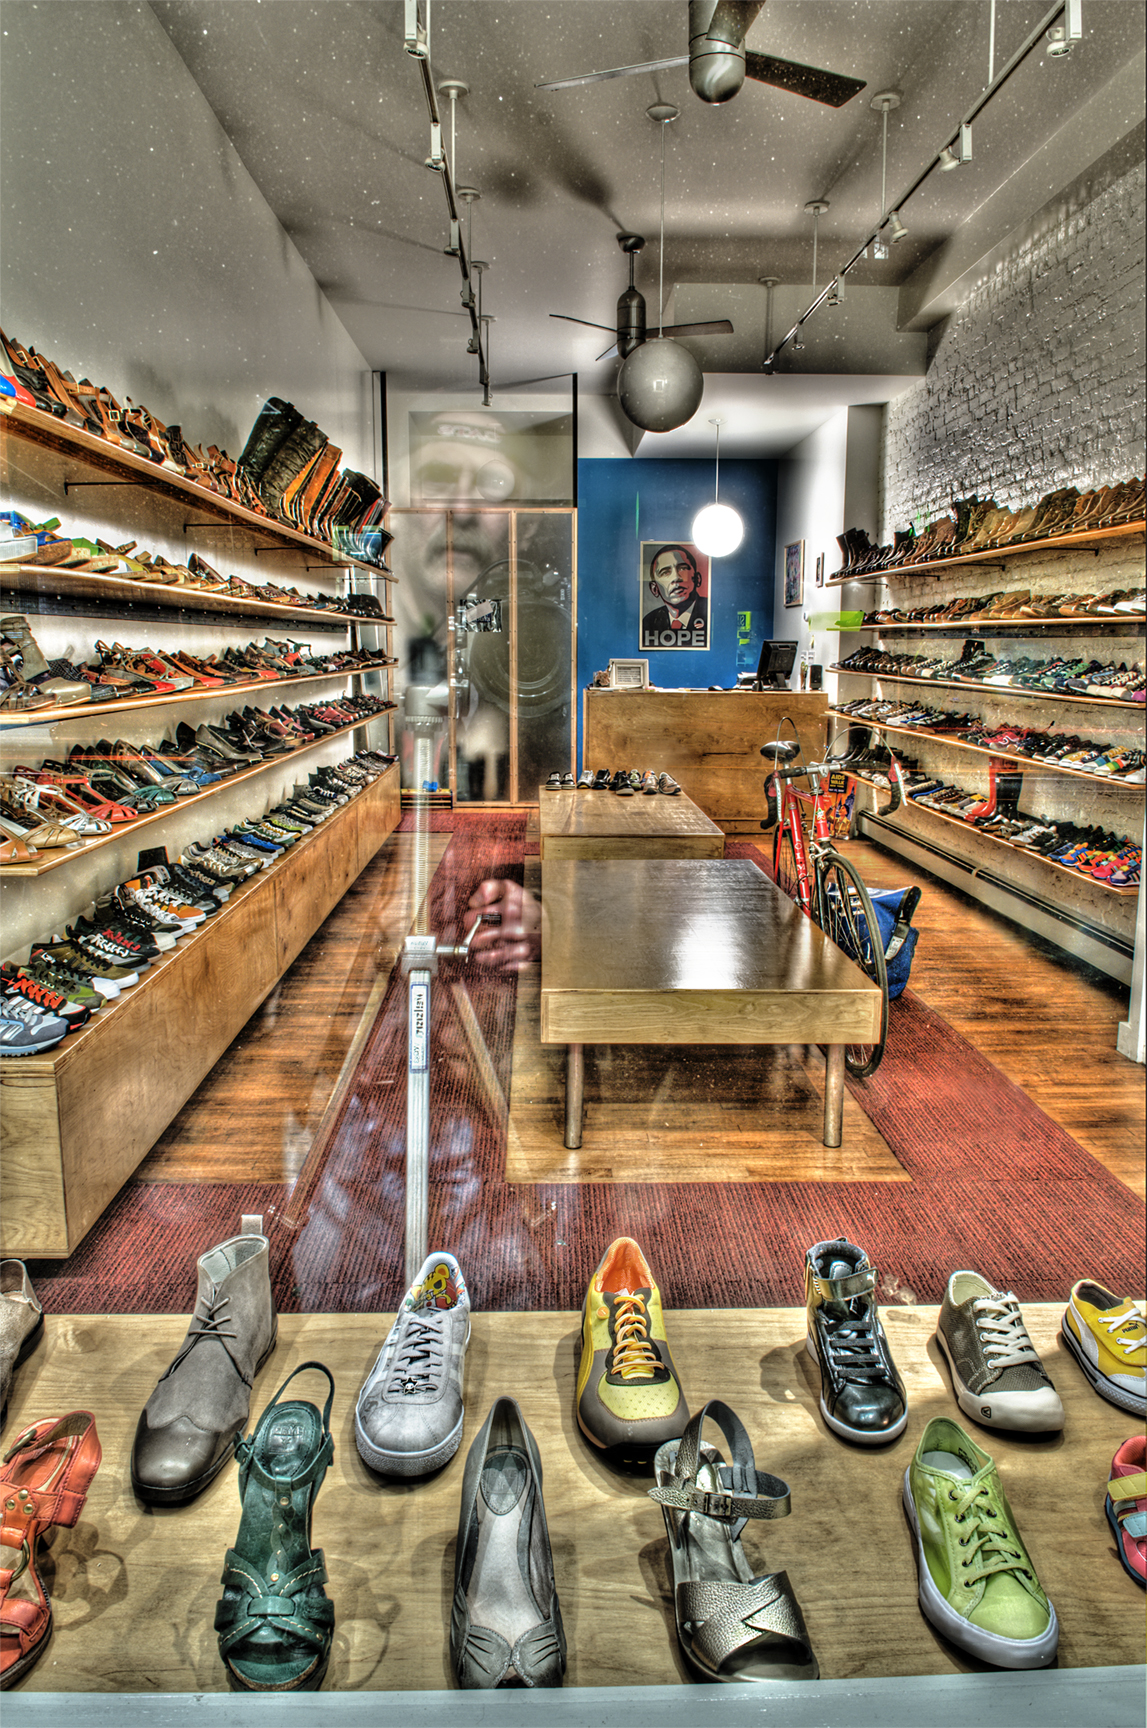 Download this Shoe Store picture